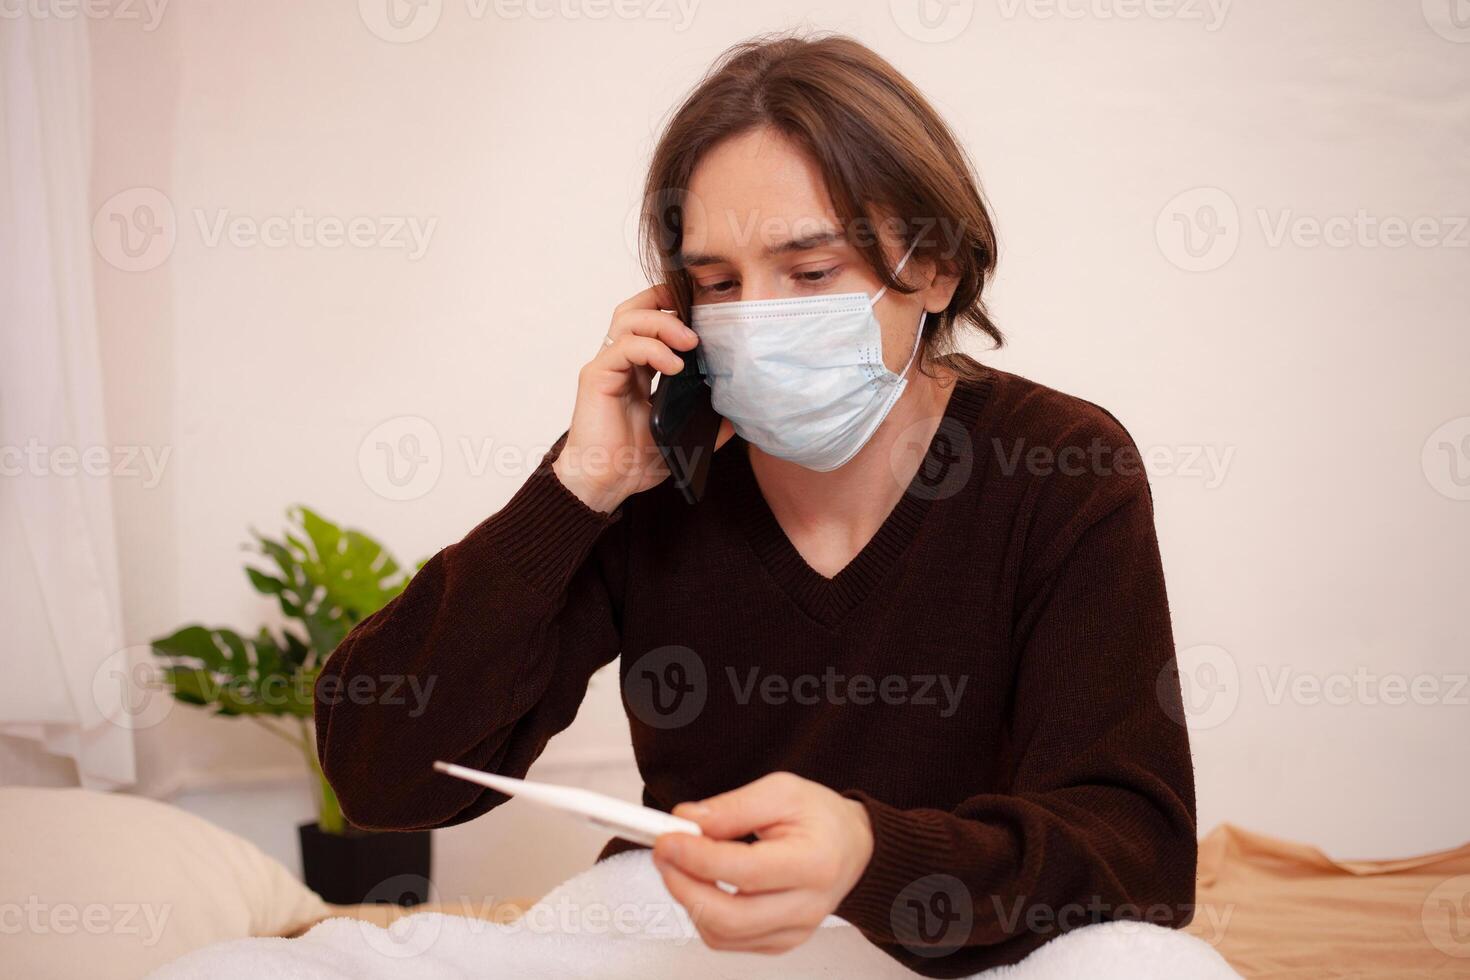 A sick man calls an ambulance on the phone. A masked man checks the temperature and dials the doctor's number on the phone. Coronavirus, home quarantine. photo